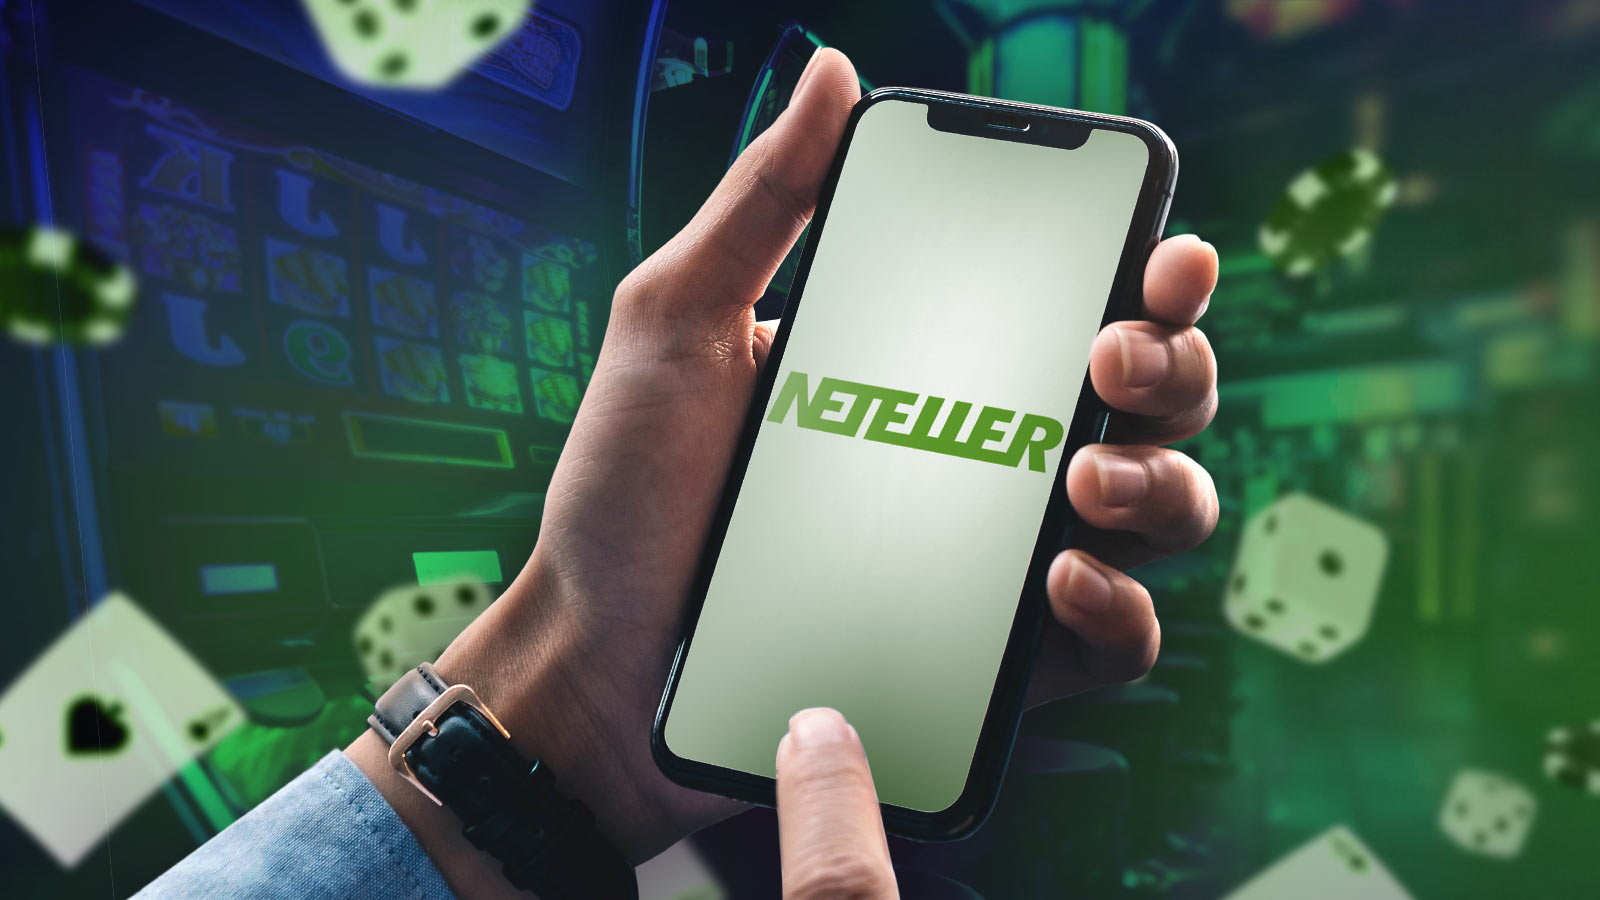 An Overview of Neteller as a Payment Provider